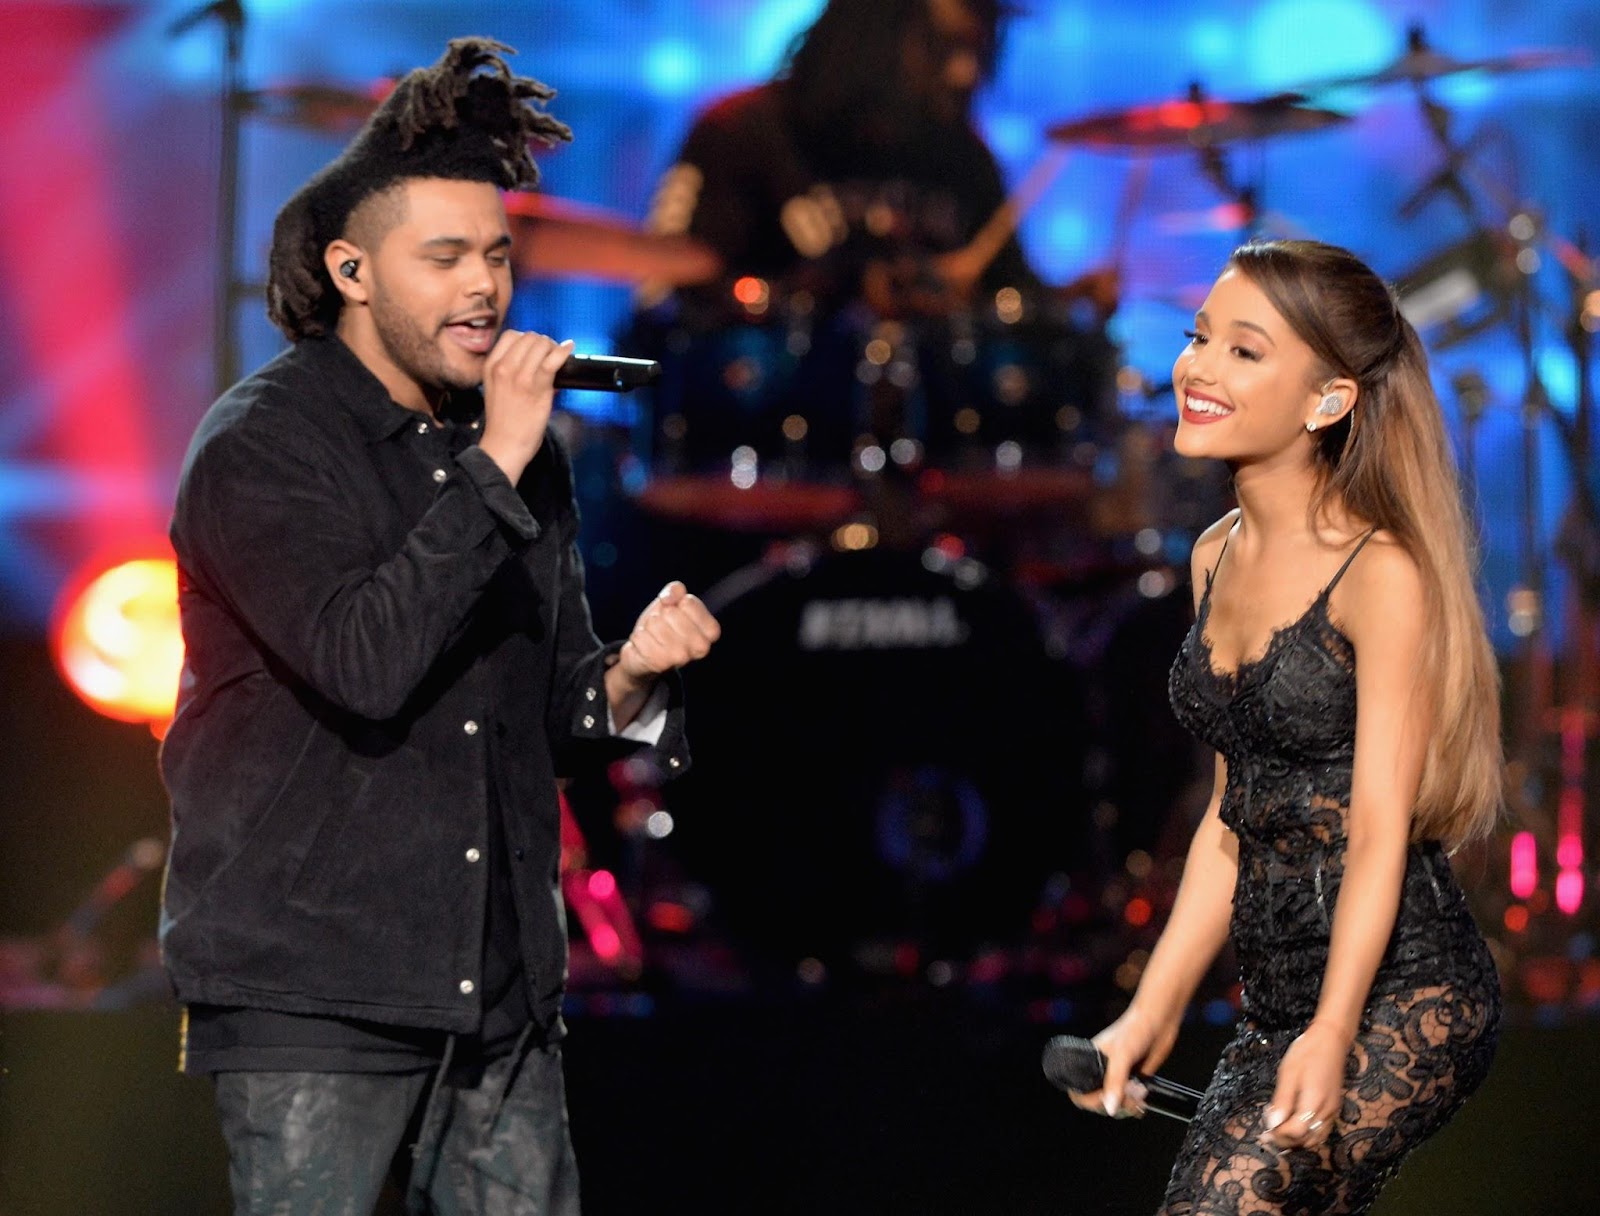 Have The Weeknd and Ariana Grande Dated?